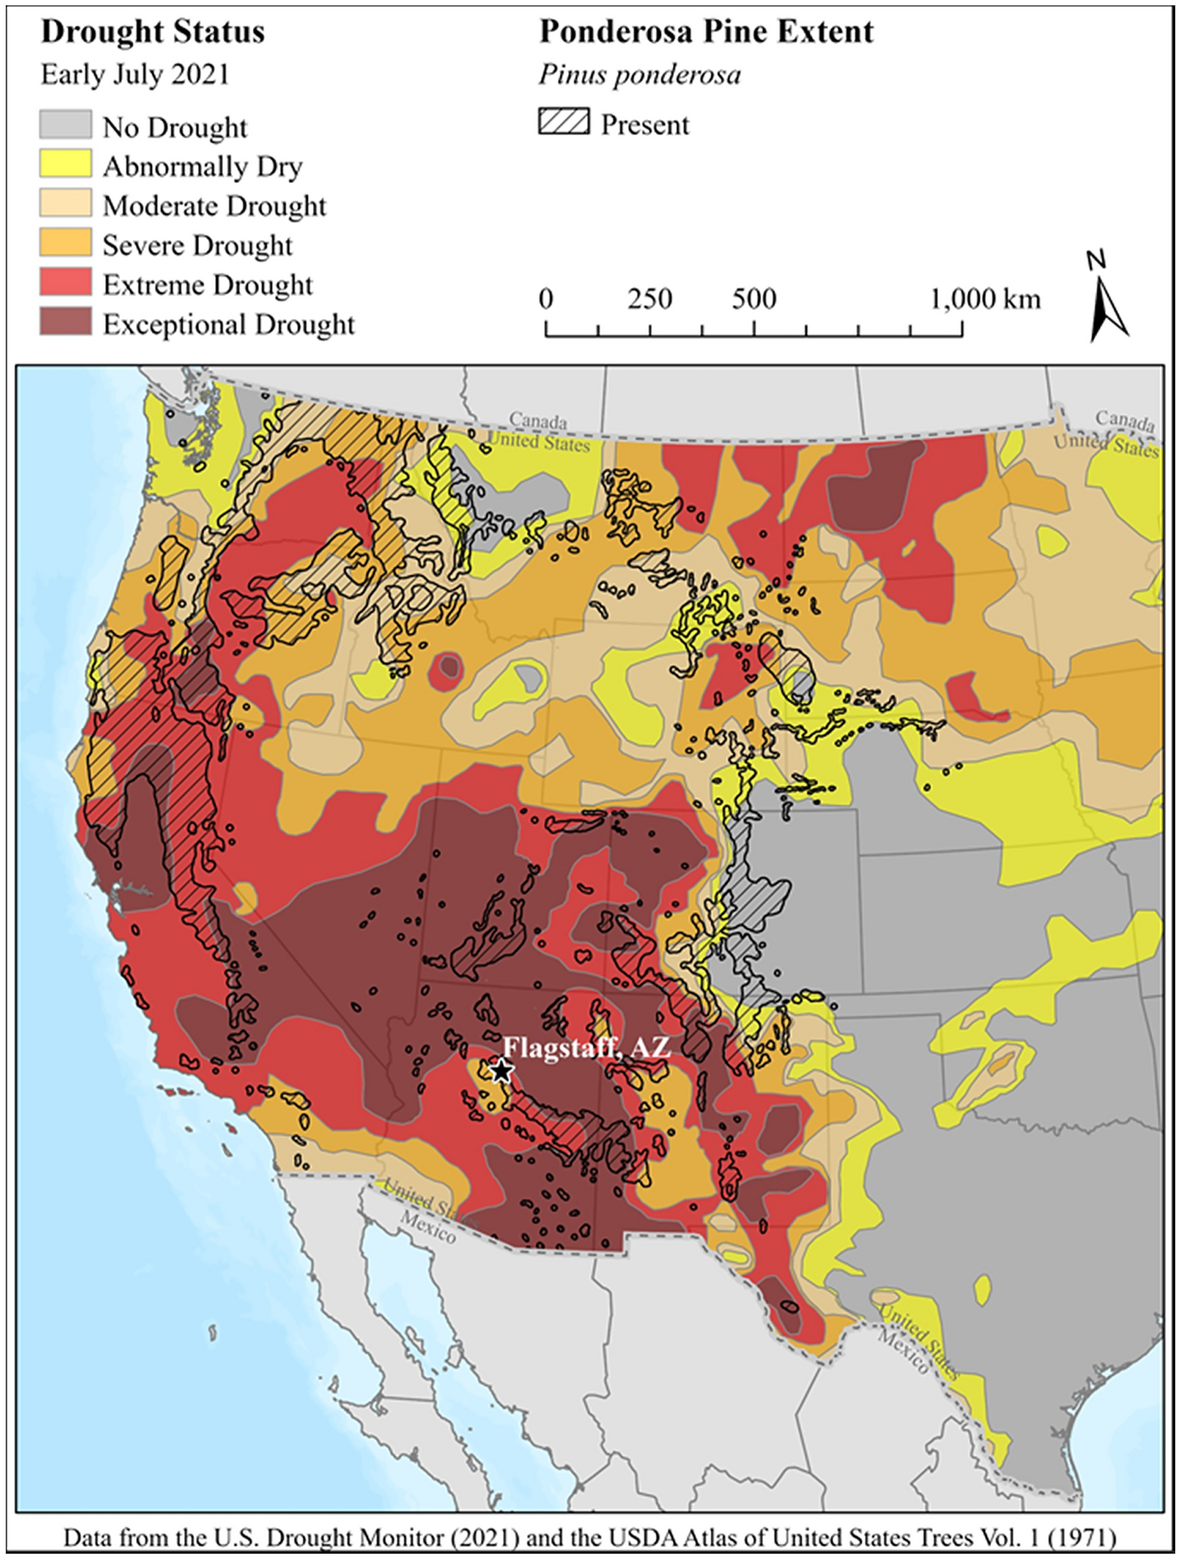 Thinning increases forest resiliency during unprecedented drought |  Scientific Reports